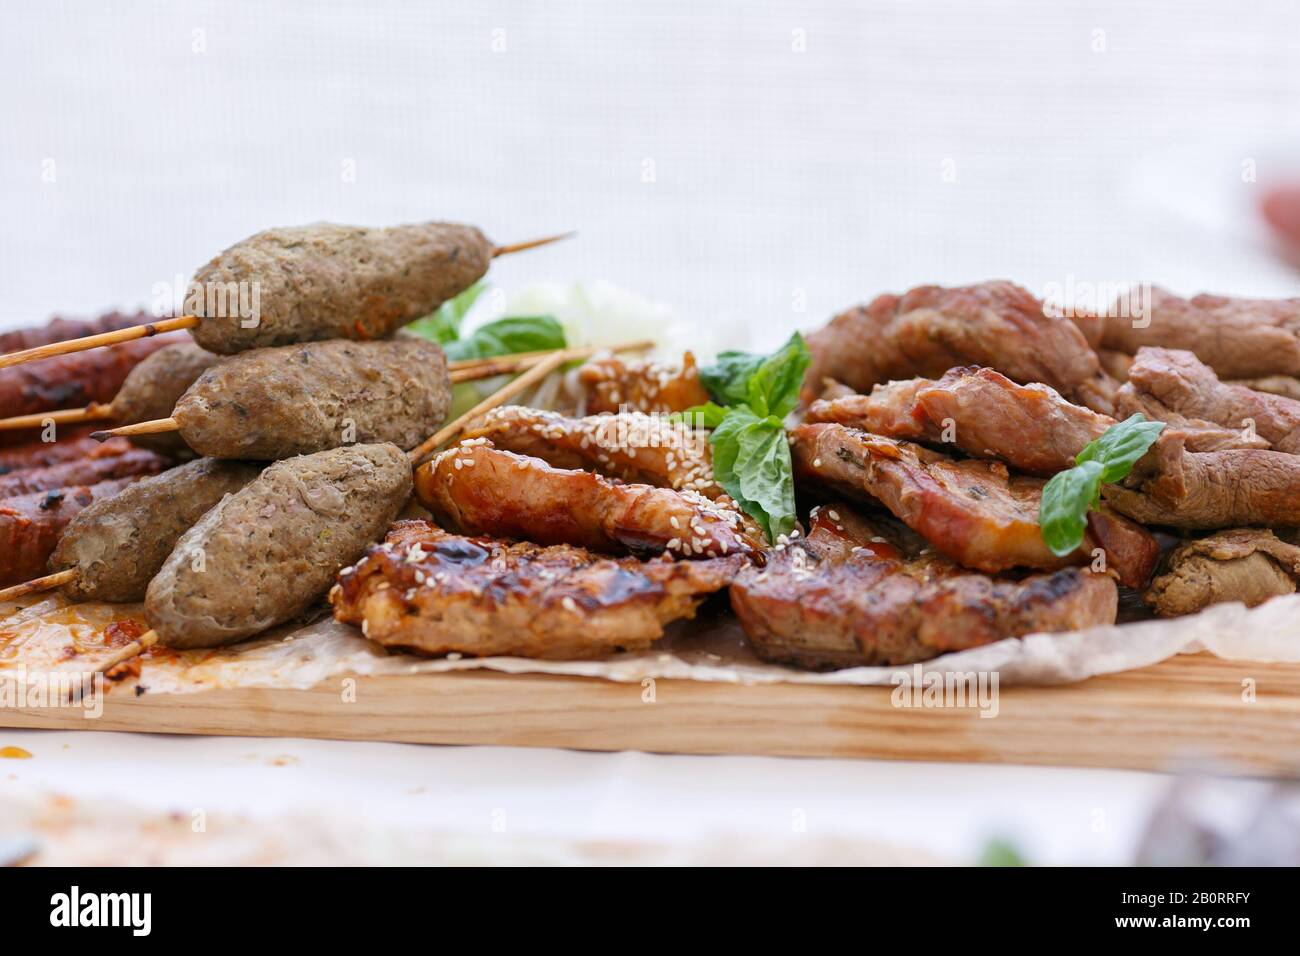 A front view of juicy meaty barbeque with lula kebabs on the wooden sticks and mint leafs as the toping Stock Photo